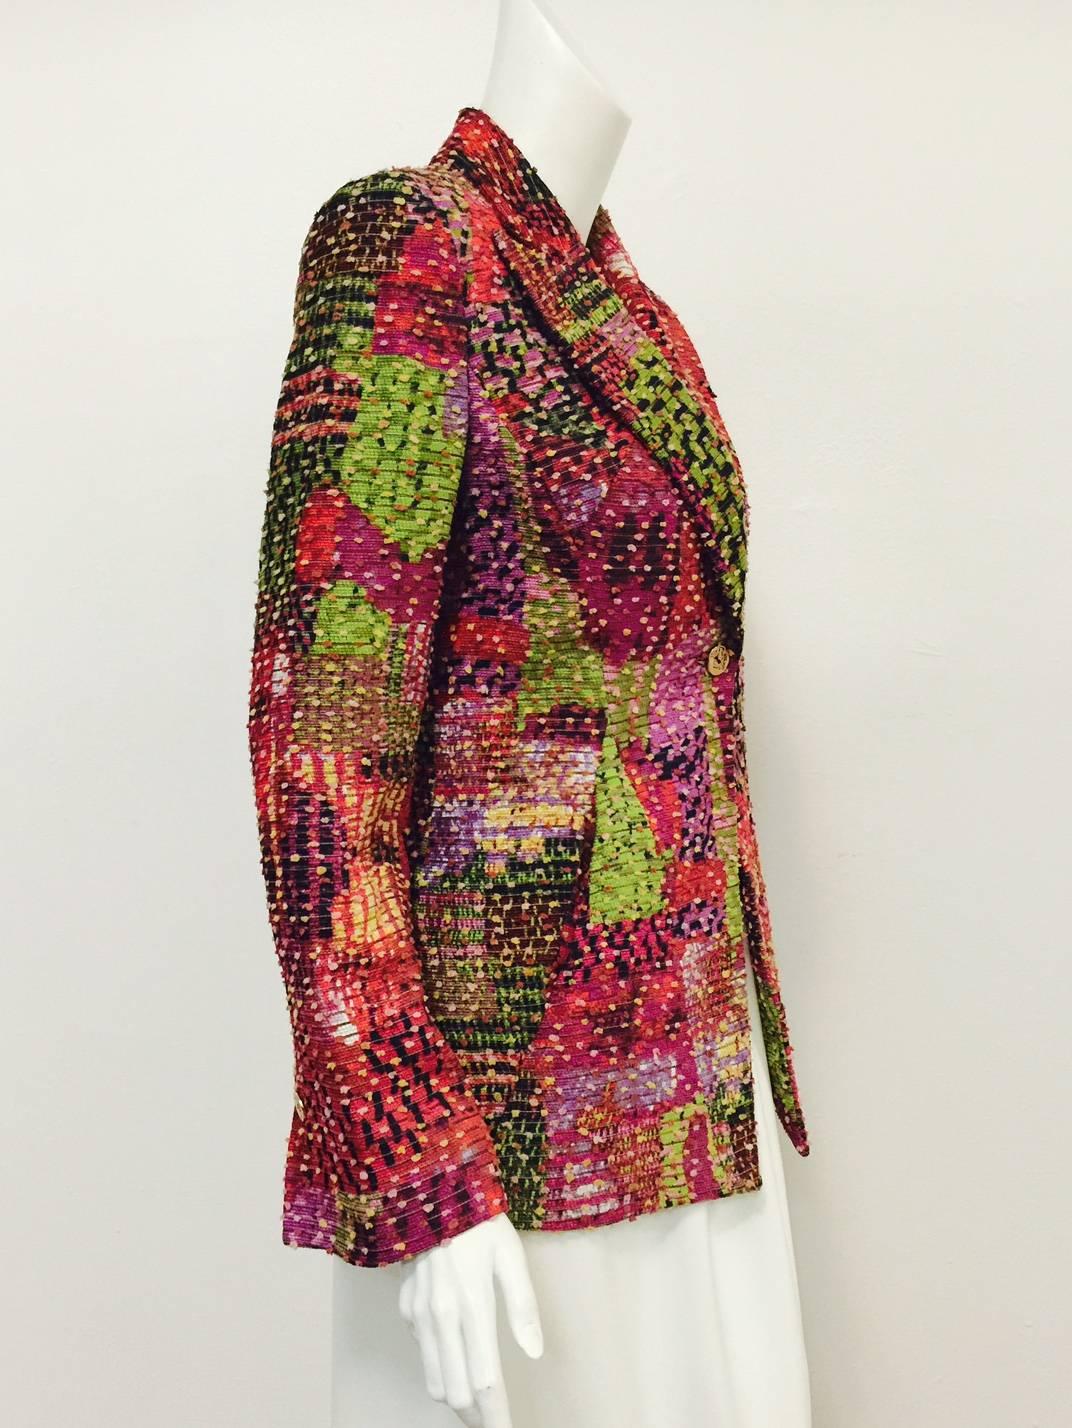 Bazar de Christian Lacroix jacket illustrates this designer's love of color, print, luxurious fabrics and.. couture!  When Lacroix opened his Haute Couture house in 1987, he quickly became known for exuberant designs and an 